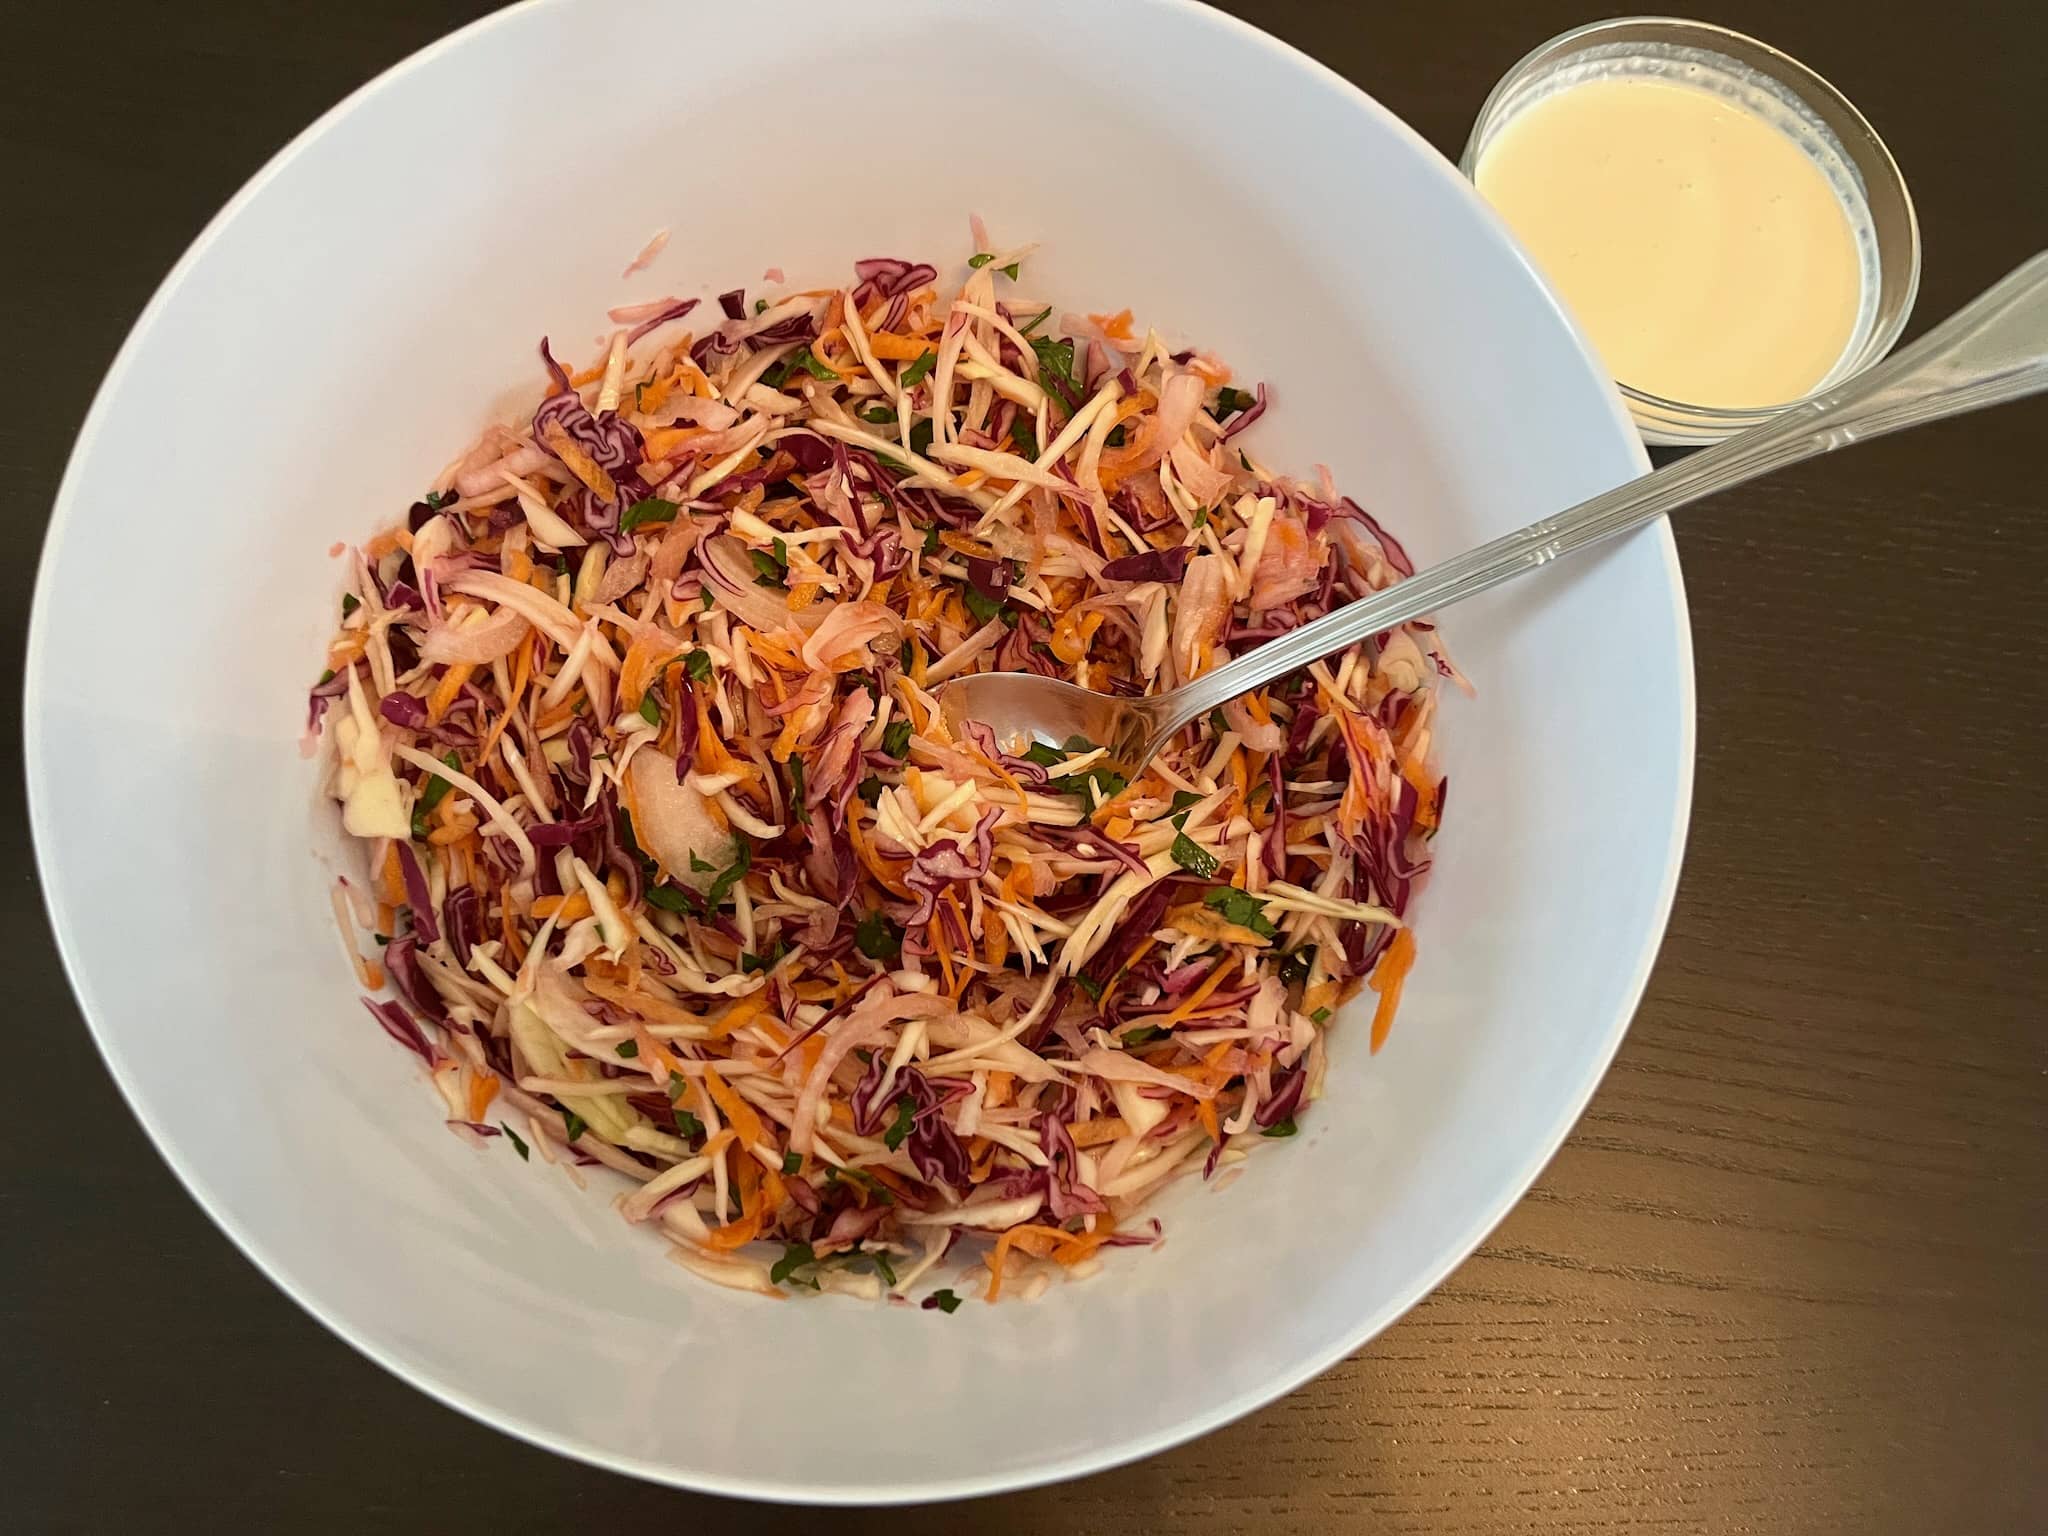 Raw coleslaw in a bowl with coleslaw dressing on a side